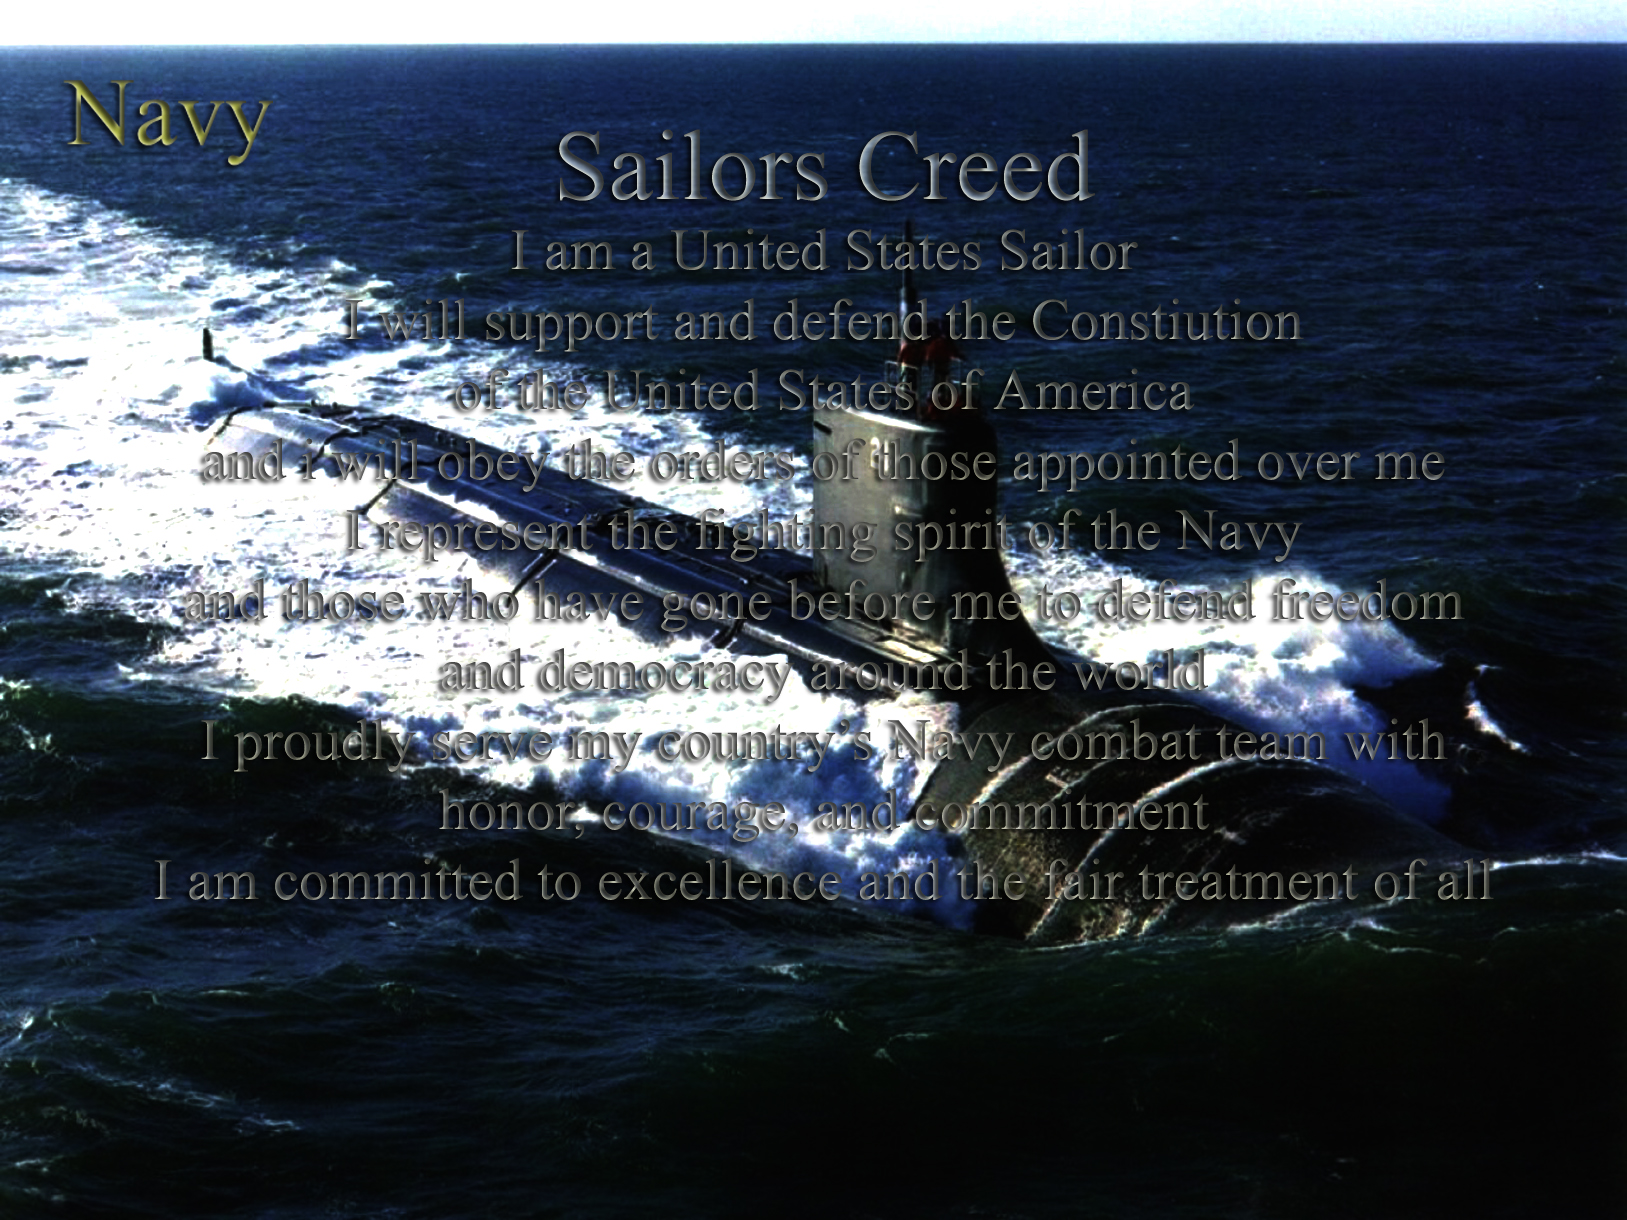 Sailors Creed by Savier on